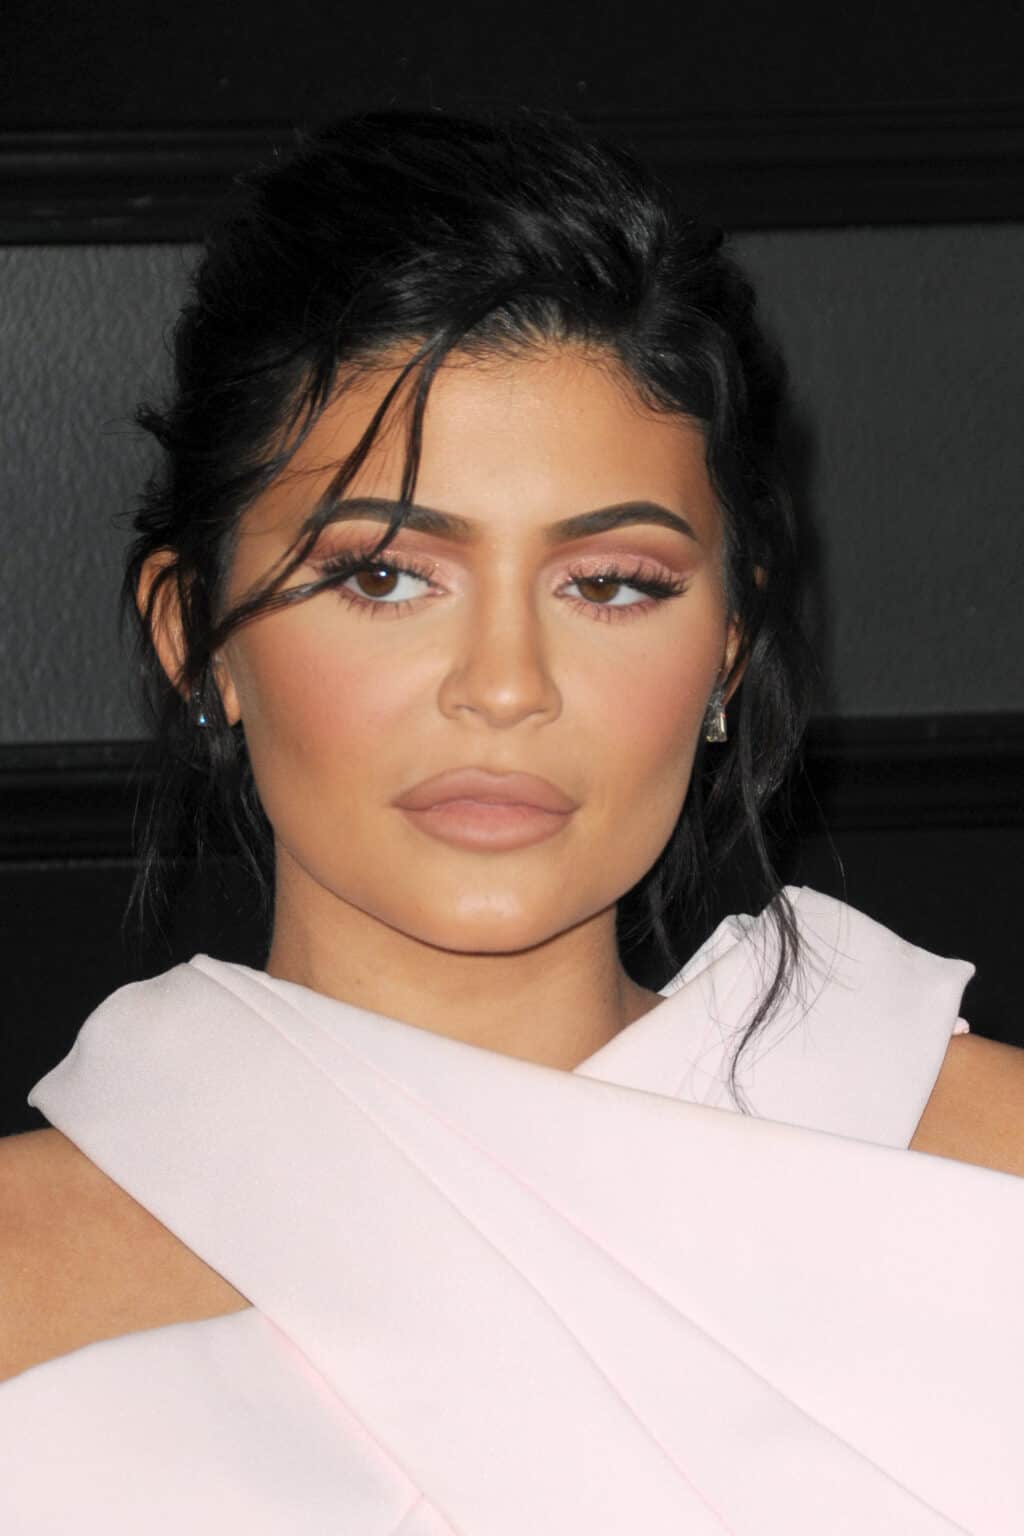 What Is Kylie Jenner's Favorite Music Genre?